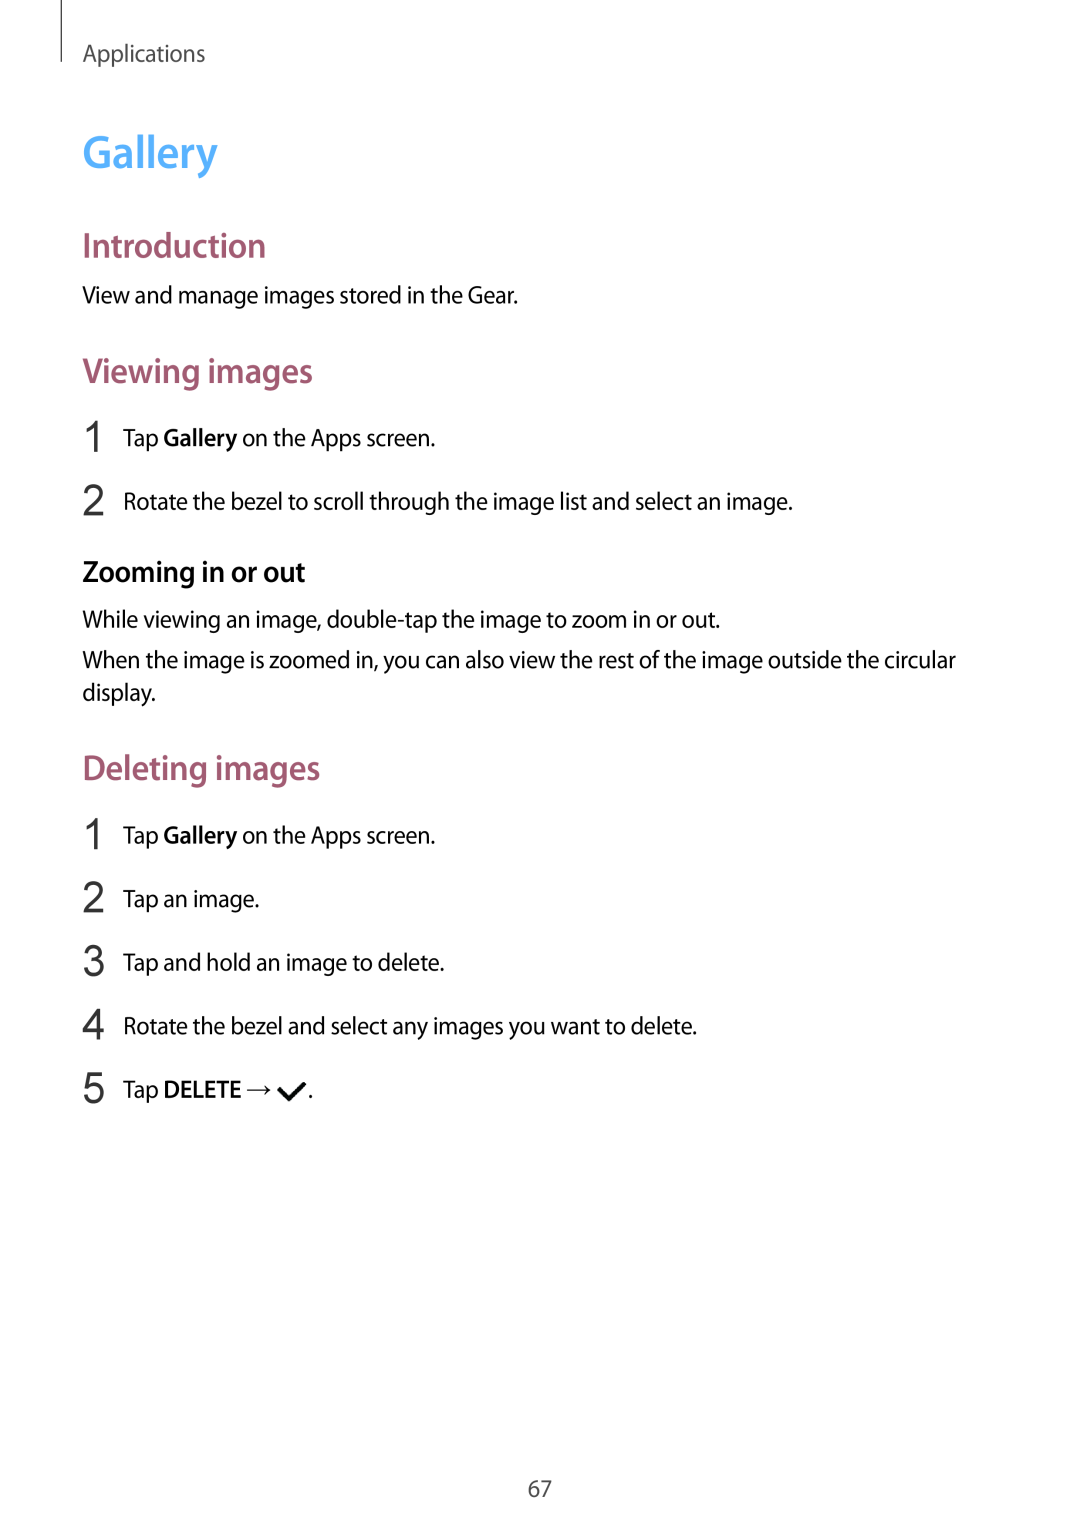 Samsung SM-R7350ZKGFTM manual Gallery, Viewing images, Deleting images, Zooming in or out, Introduction, Applications 